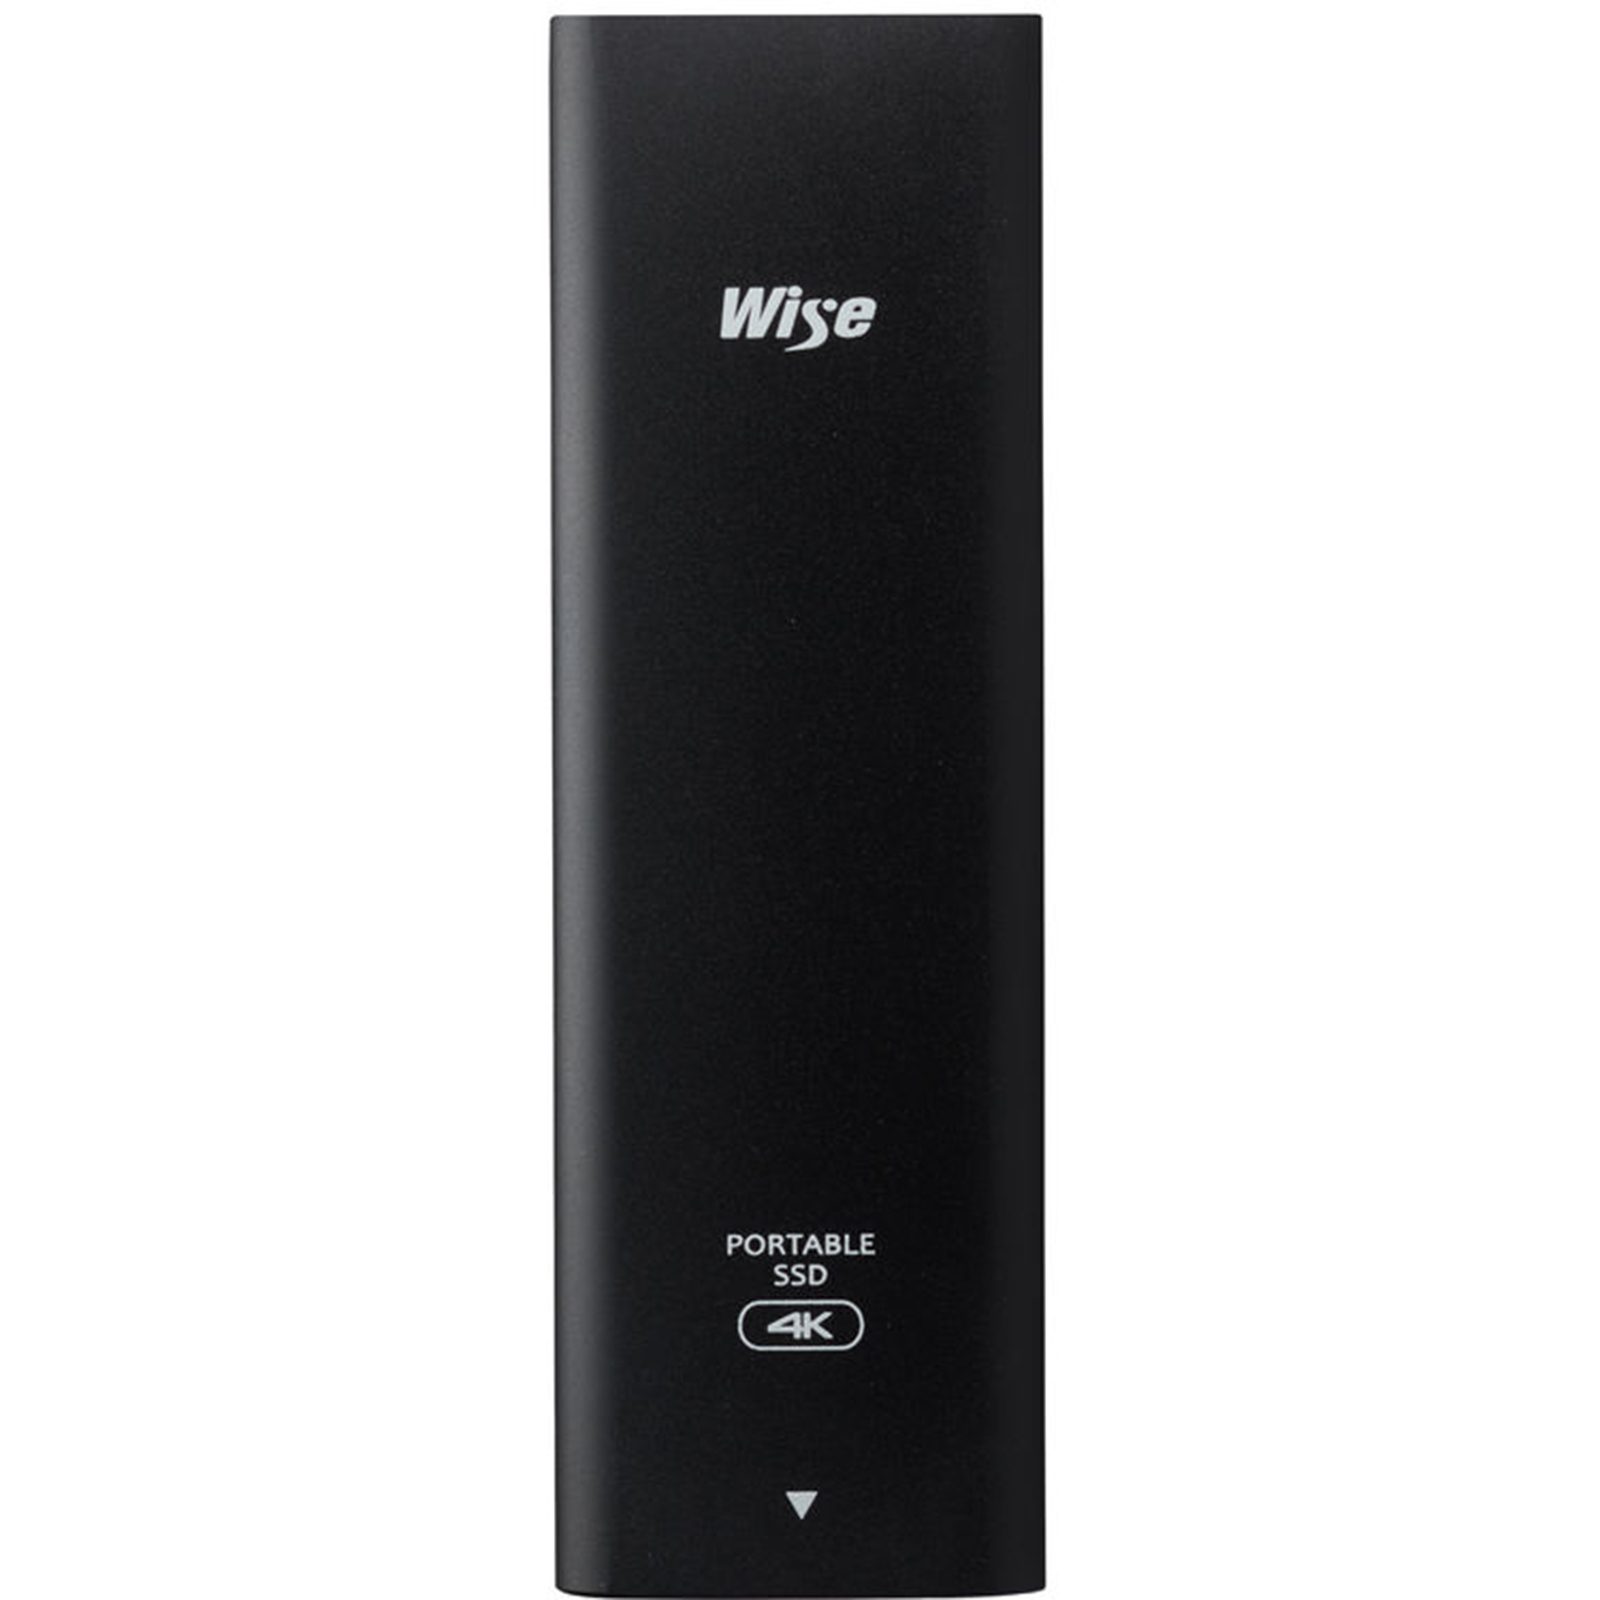 Wise 2TB Portable SSD